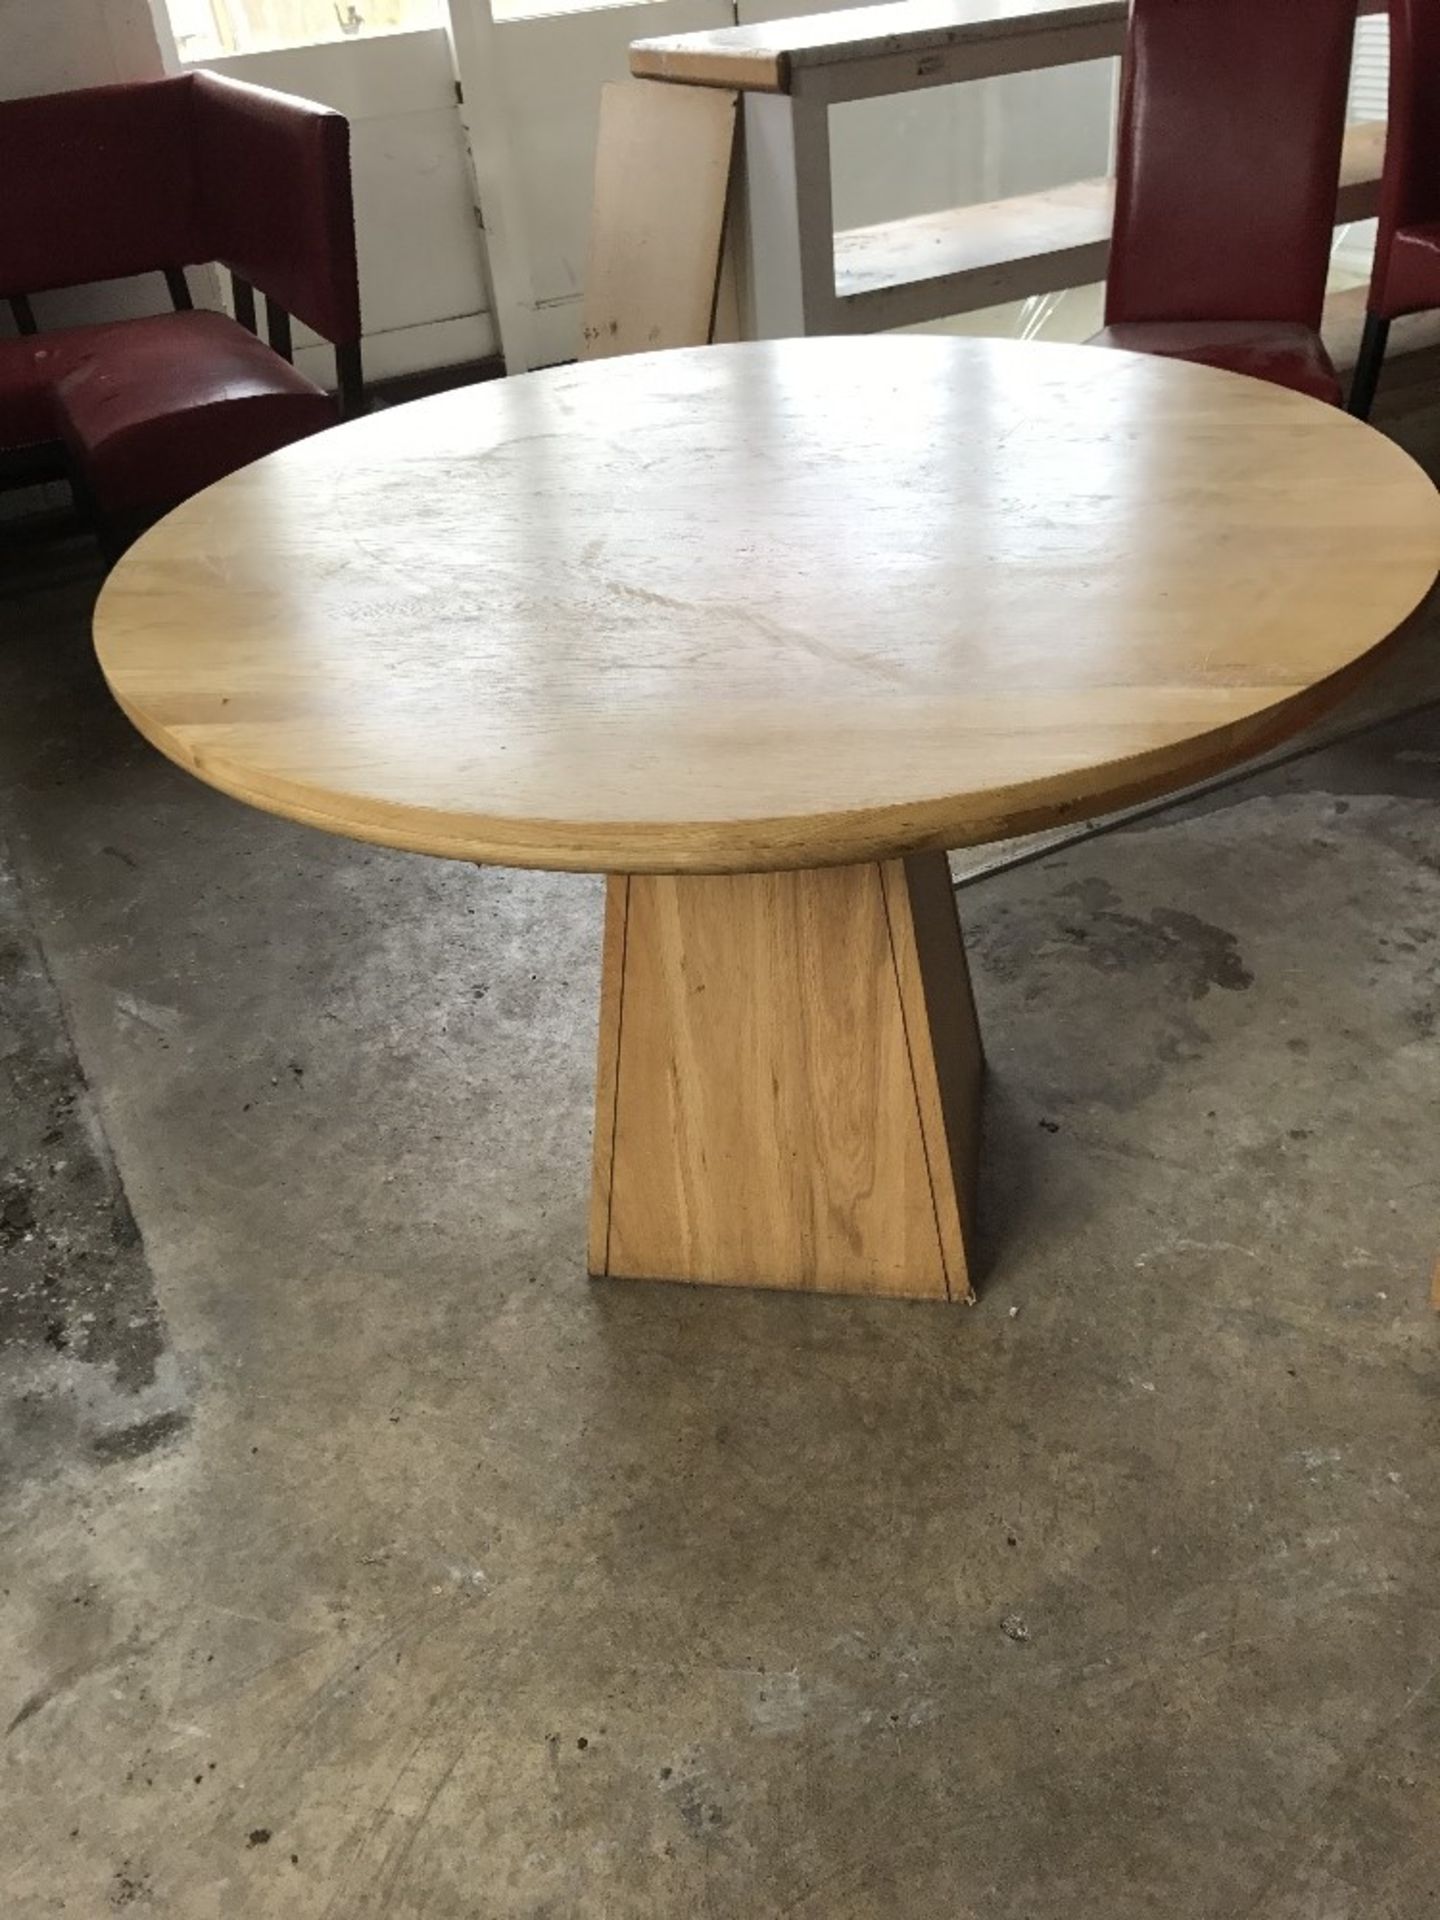 Excellent quality wooden dining table, seats up to 6 with wooden pedestal base